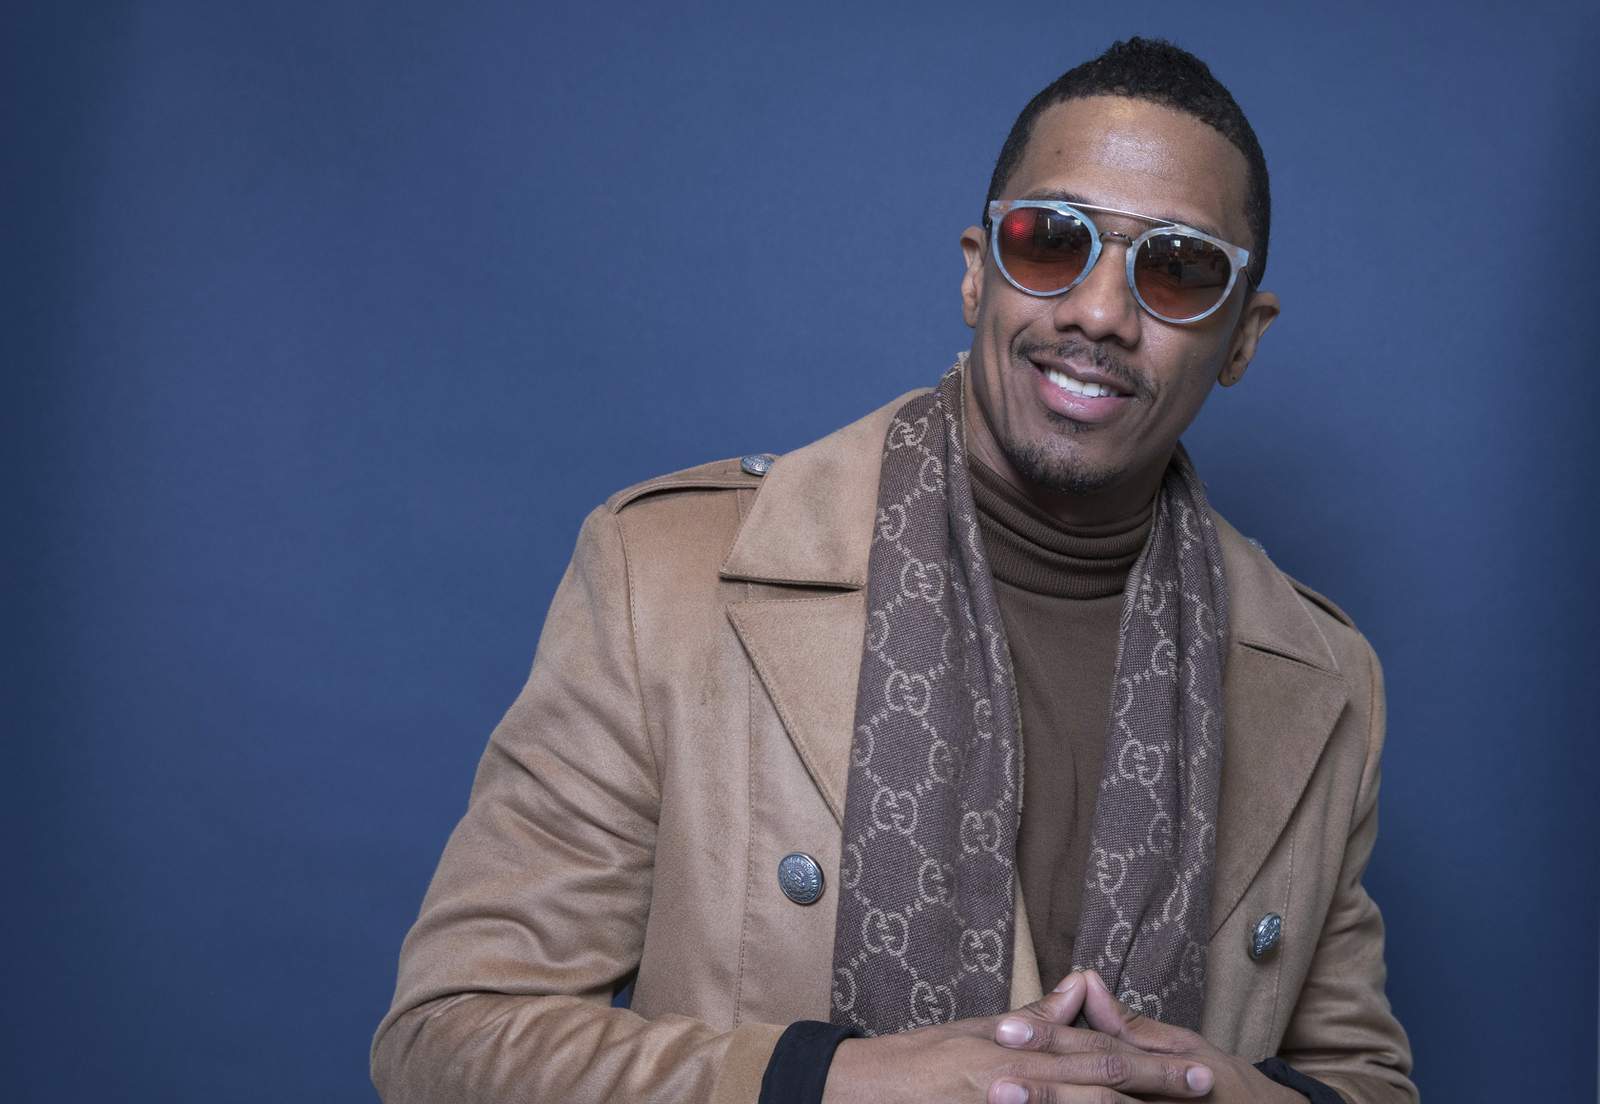 Jewish leaders condemn 'hurtful' words by Nick Cannon